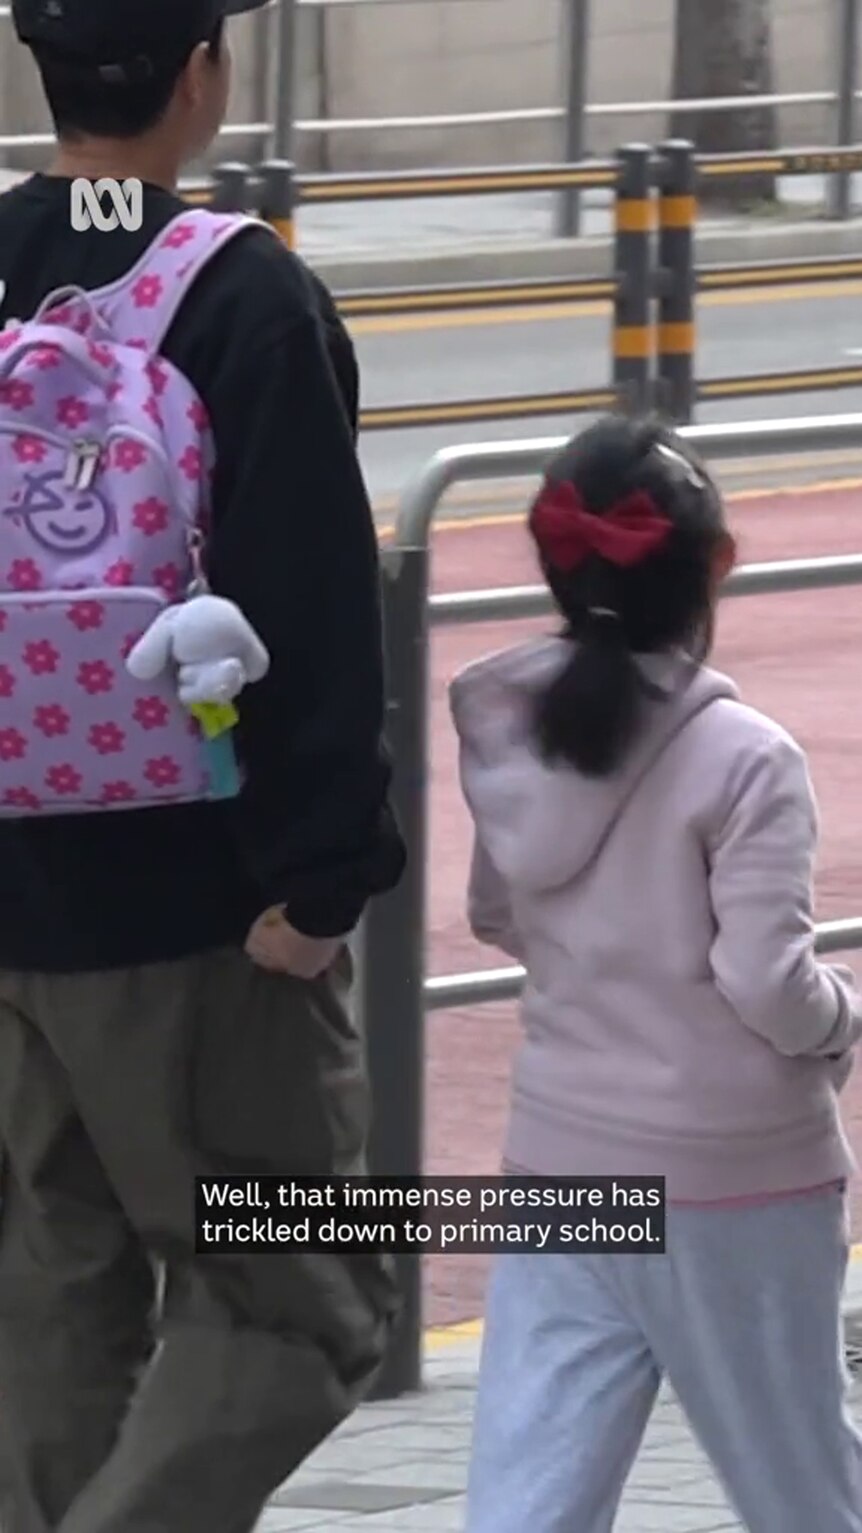 An adult with black hair and a pink backpack walks with a child on an urban street